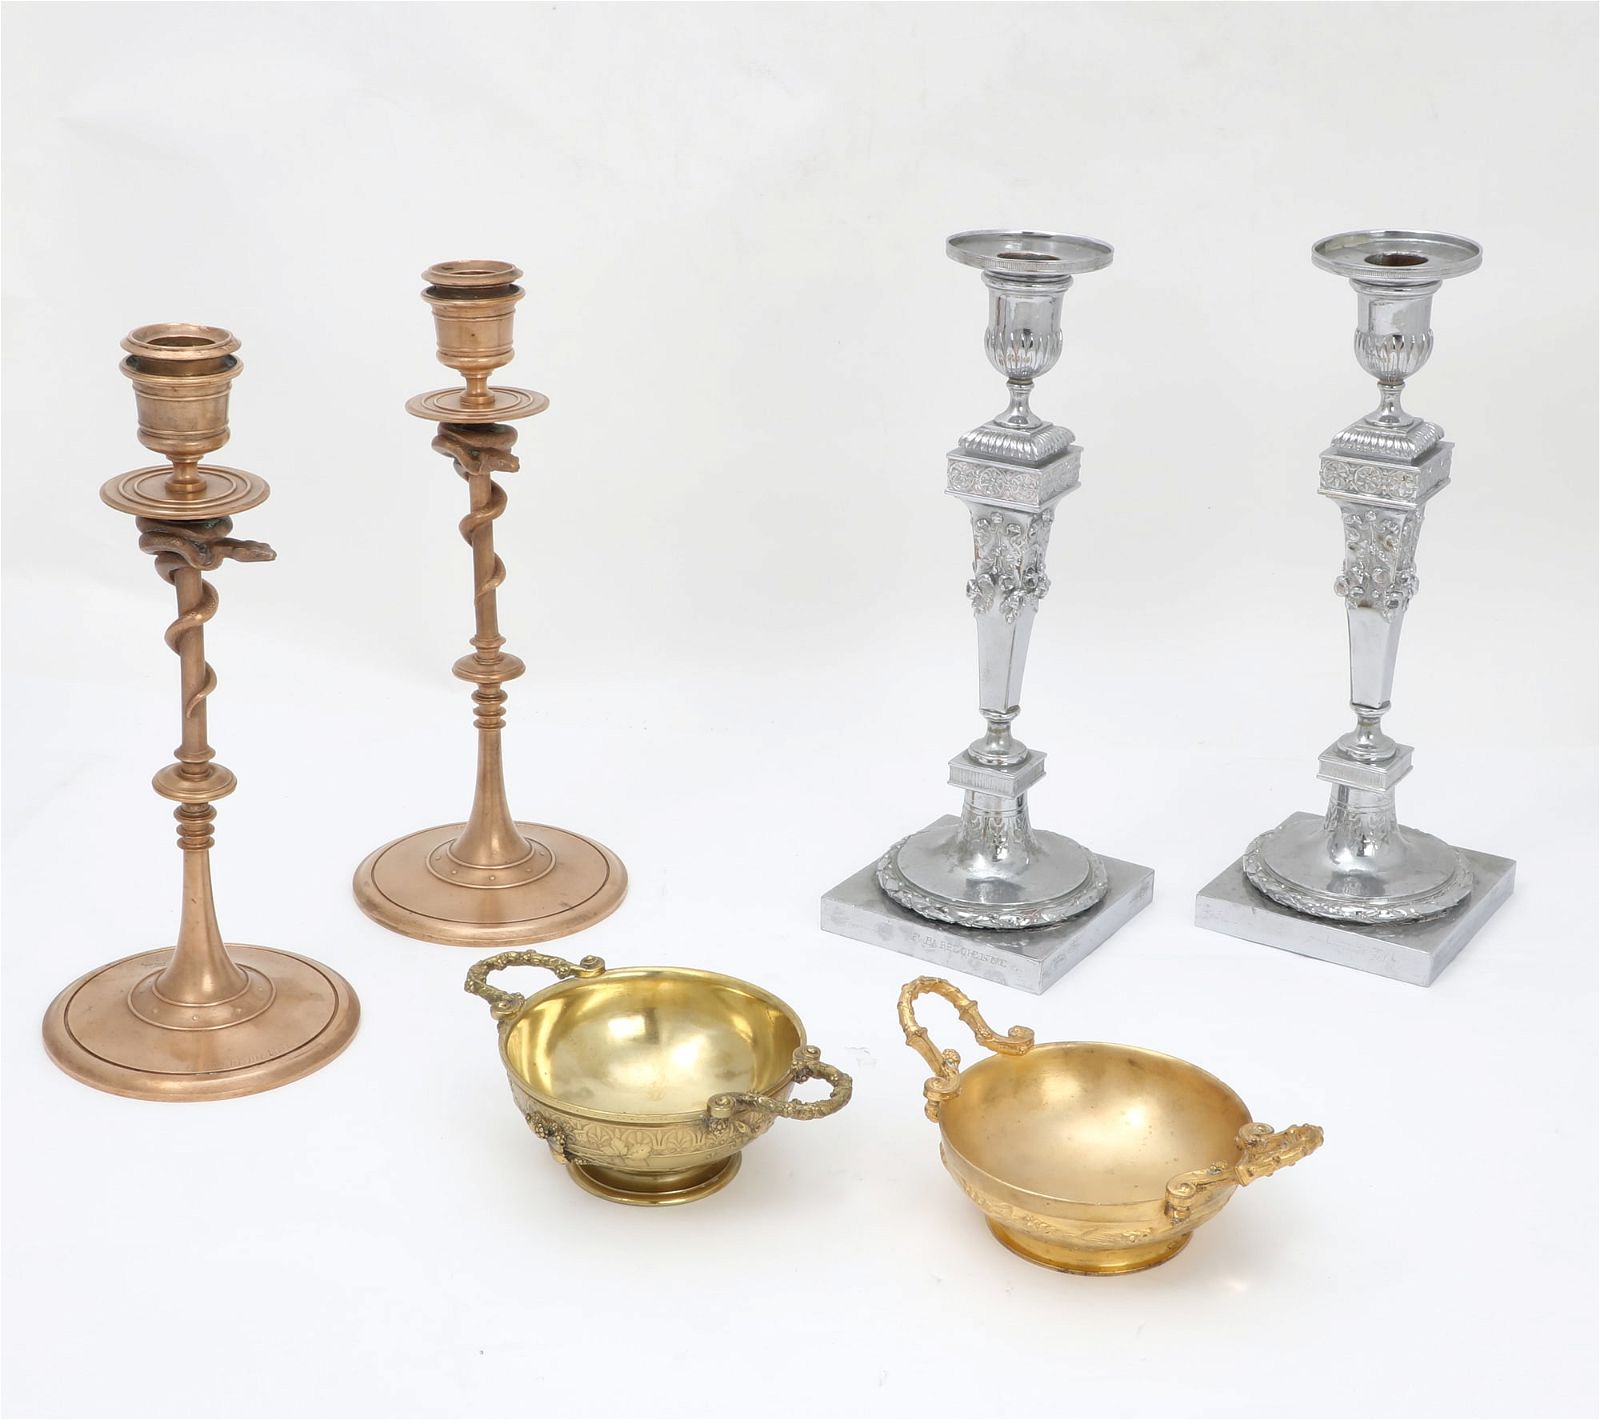 SIX FRENCH METALWARE TABLE ARTICLES,